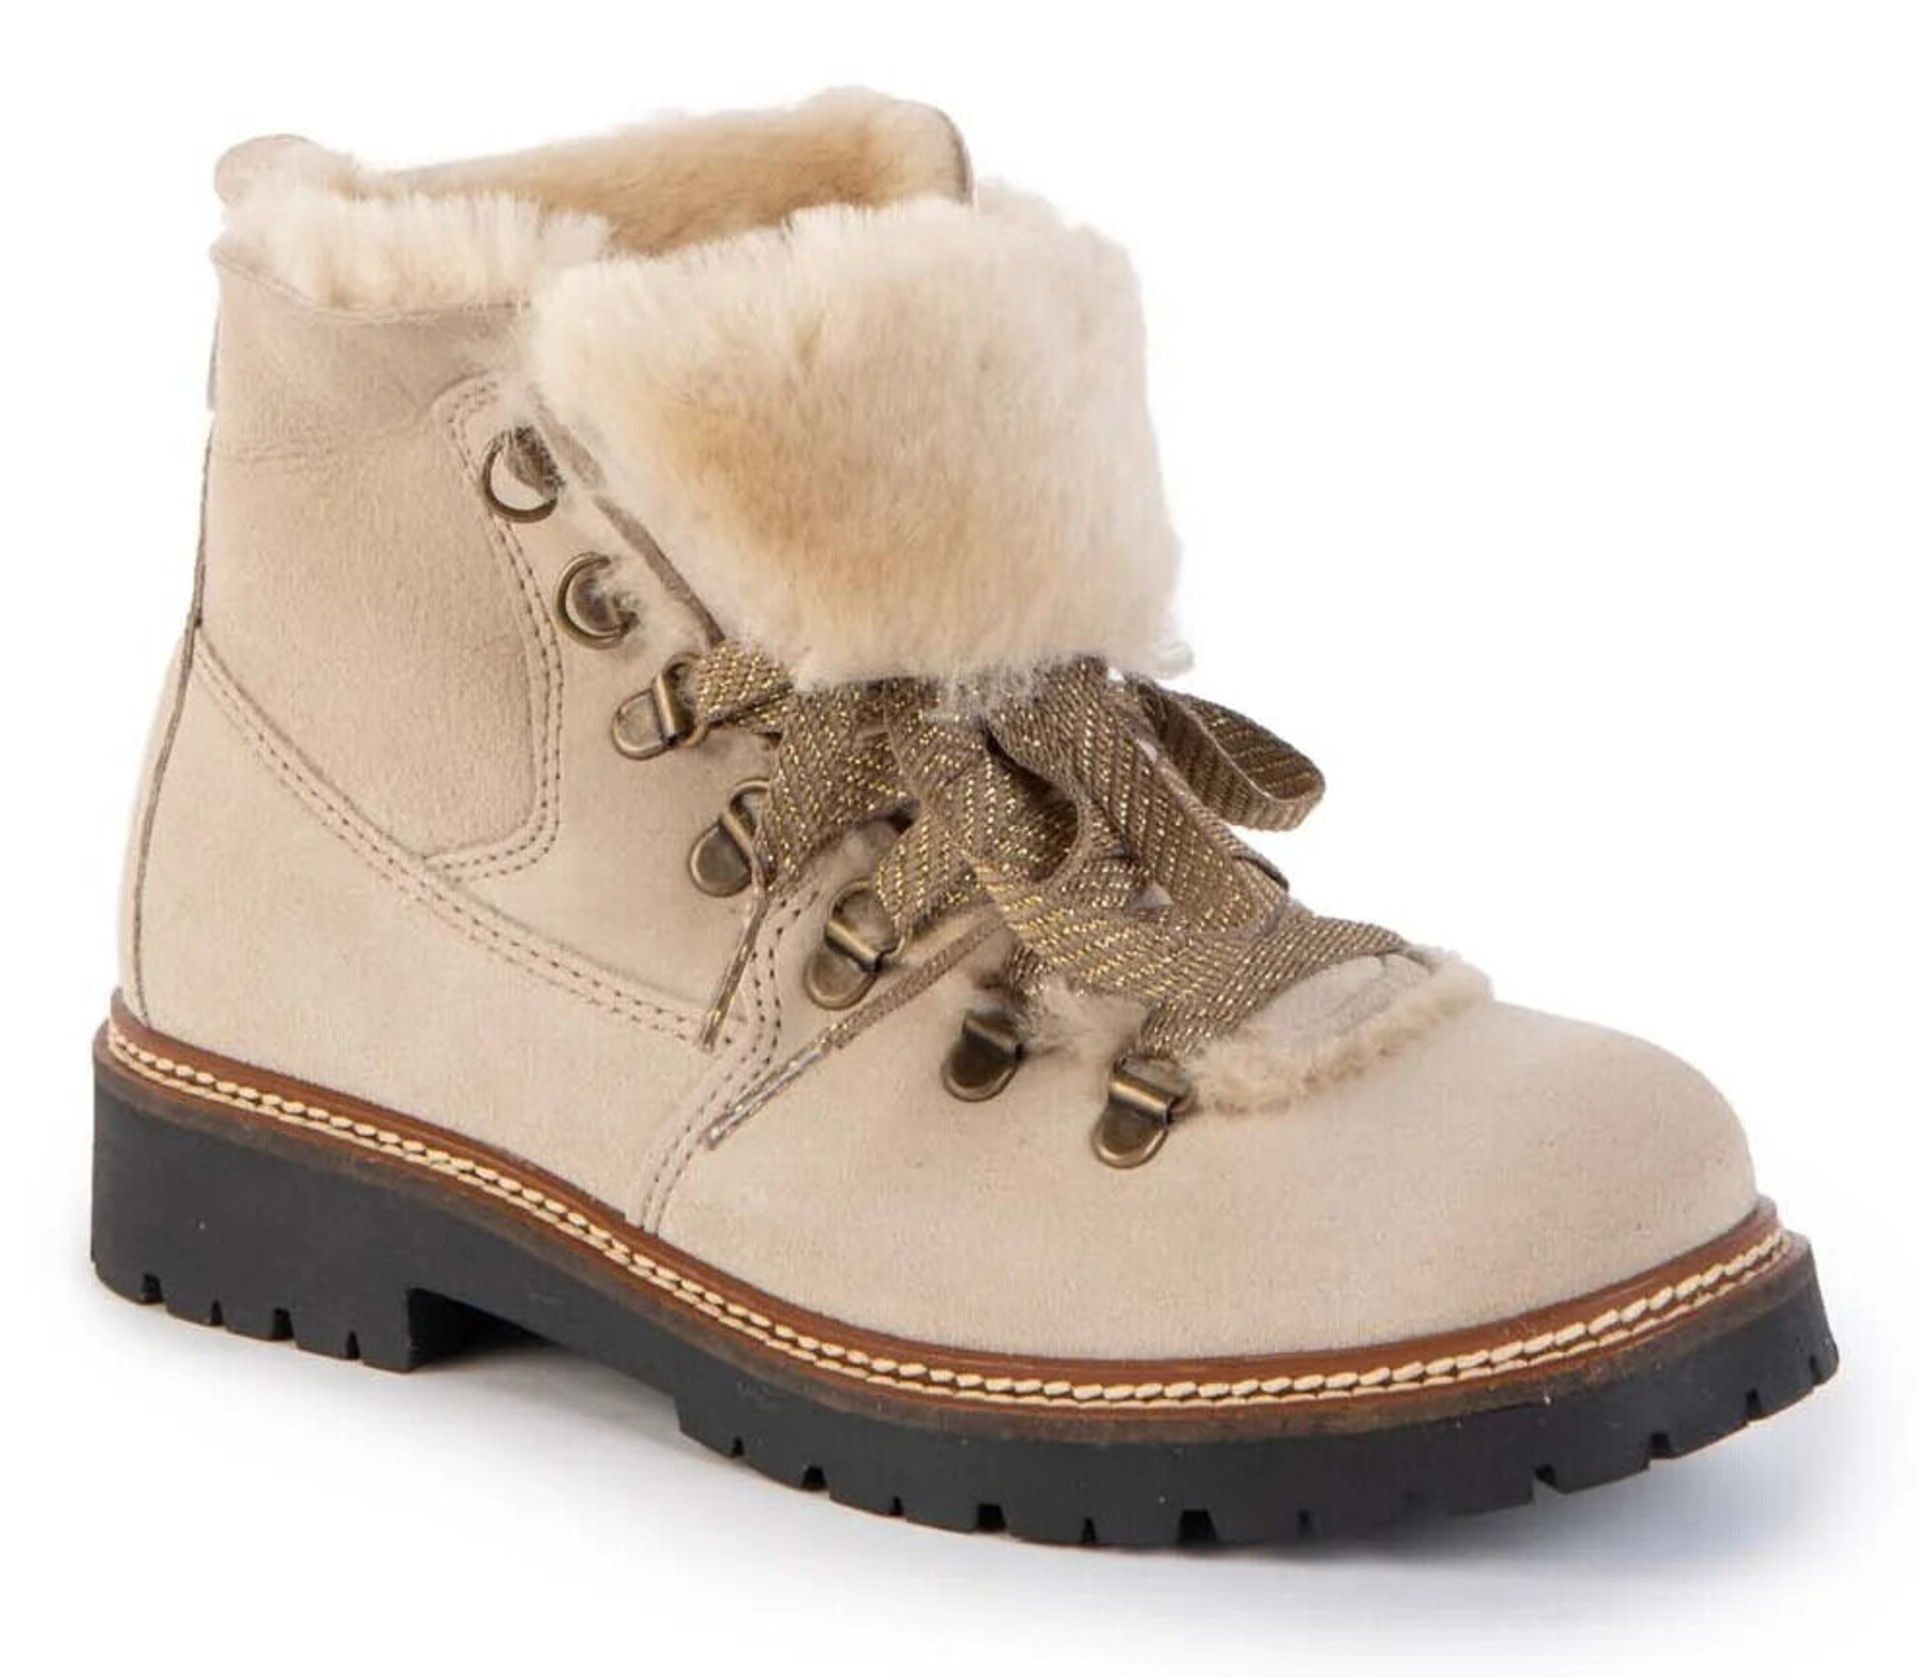 1 x Pair of Designer Olang Women's Winter Boots - Aurora.Lux 88 Beige - Euro Size 39 - New Boxed - Image 4 of 6